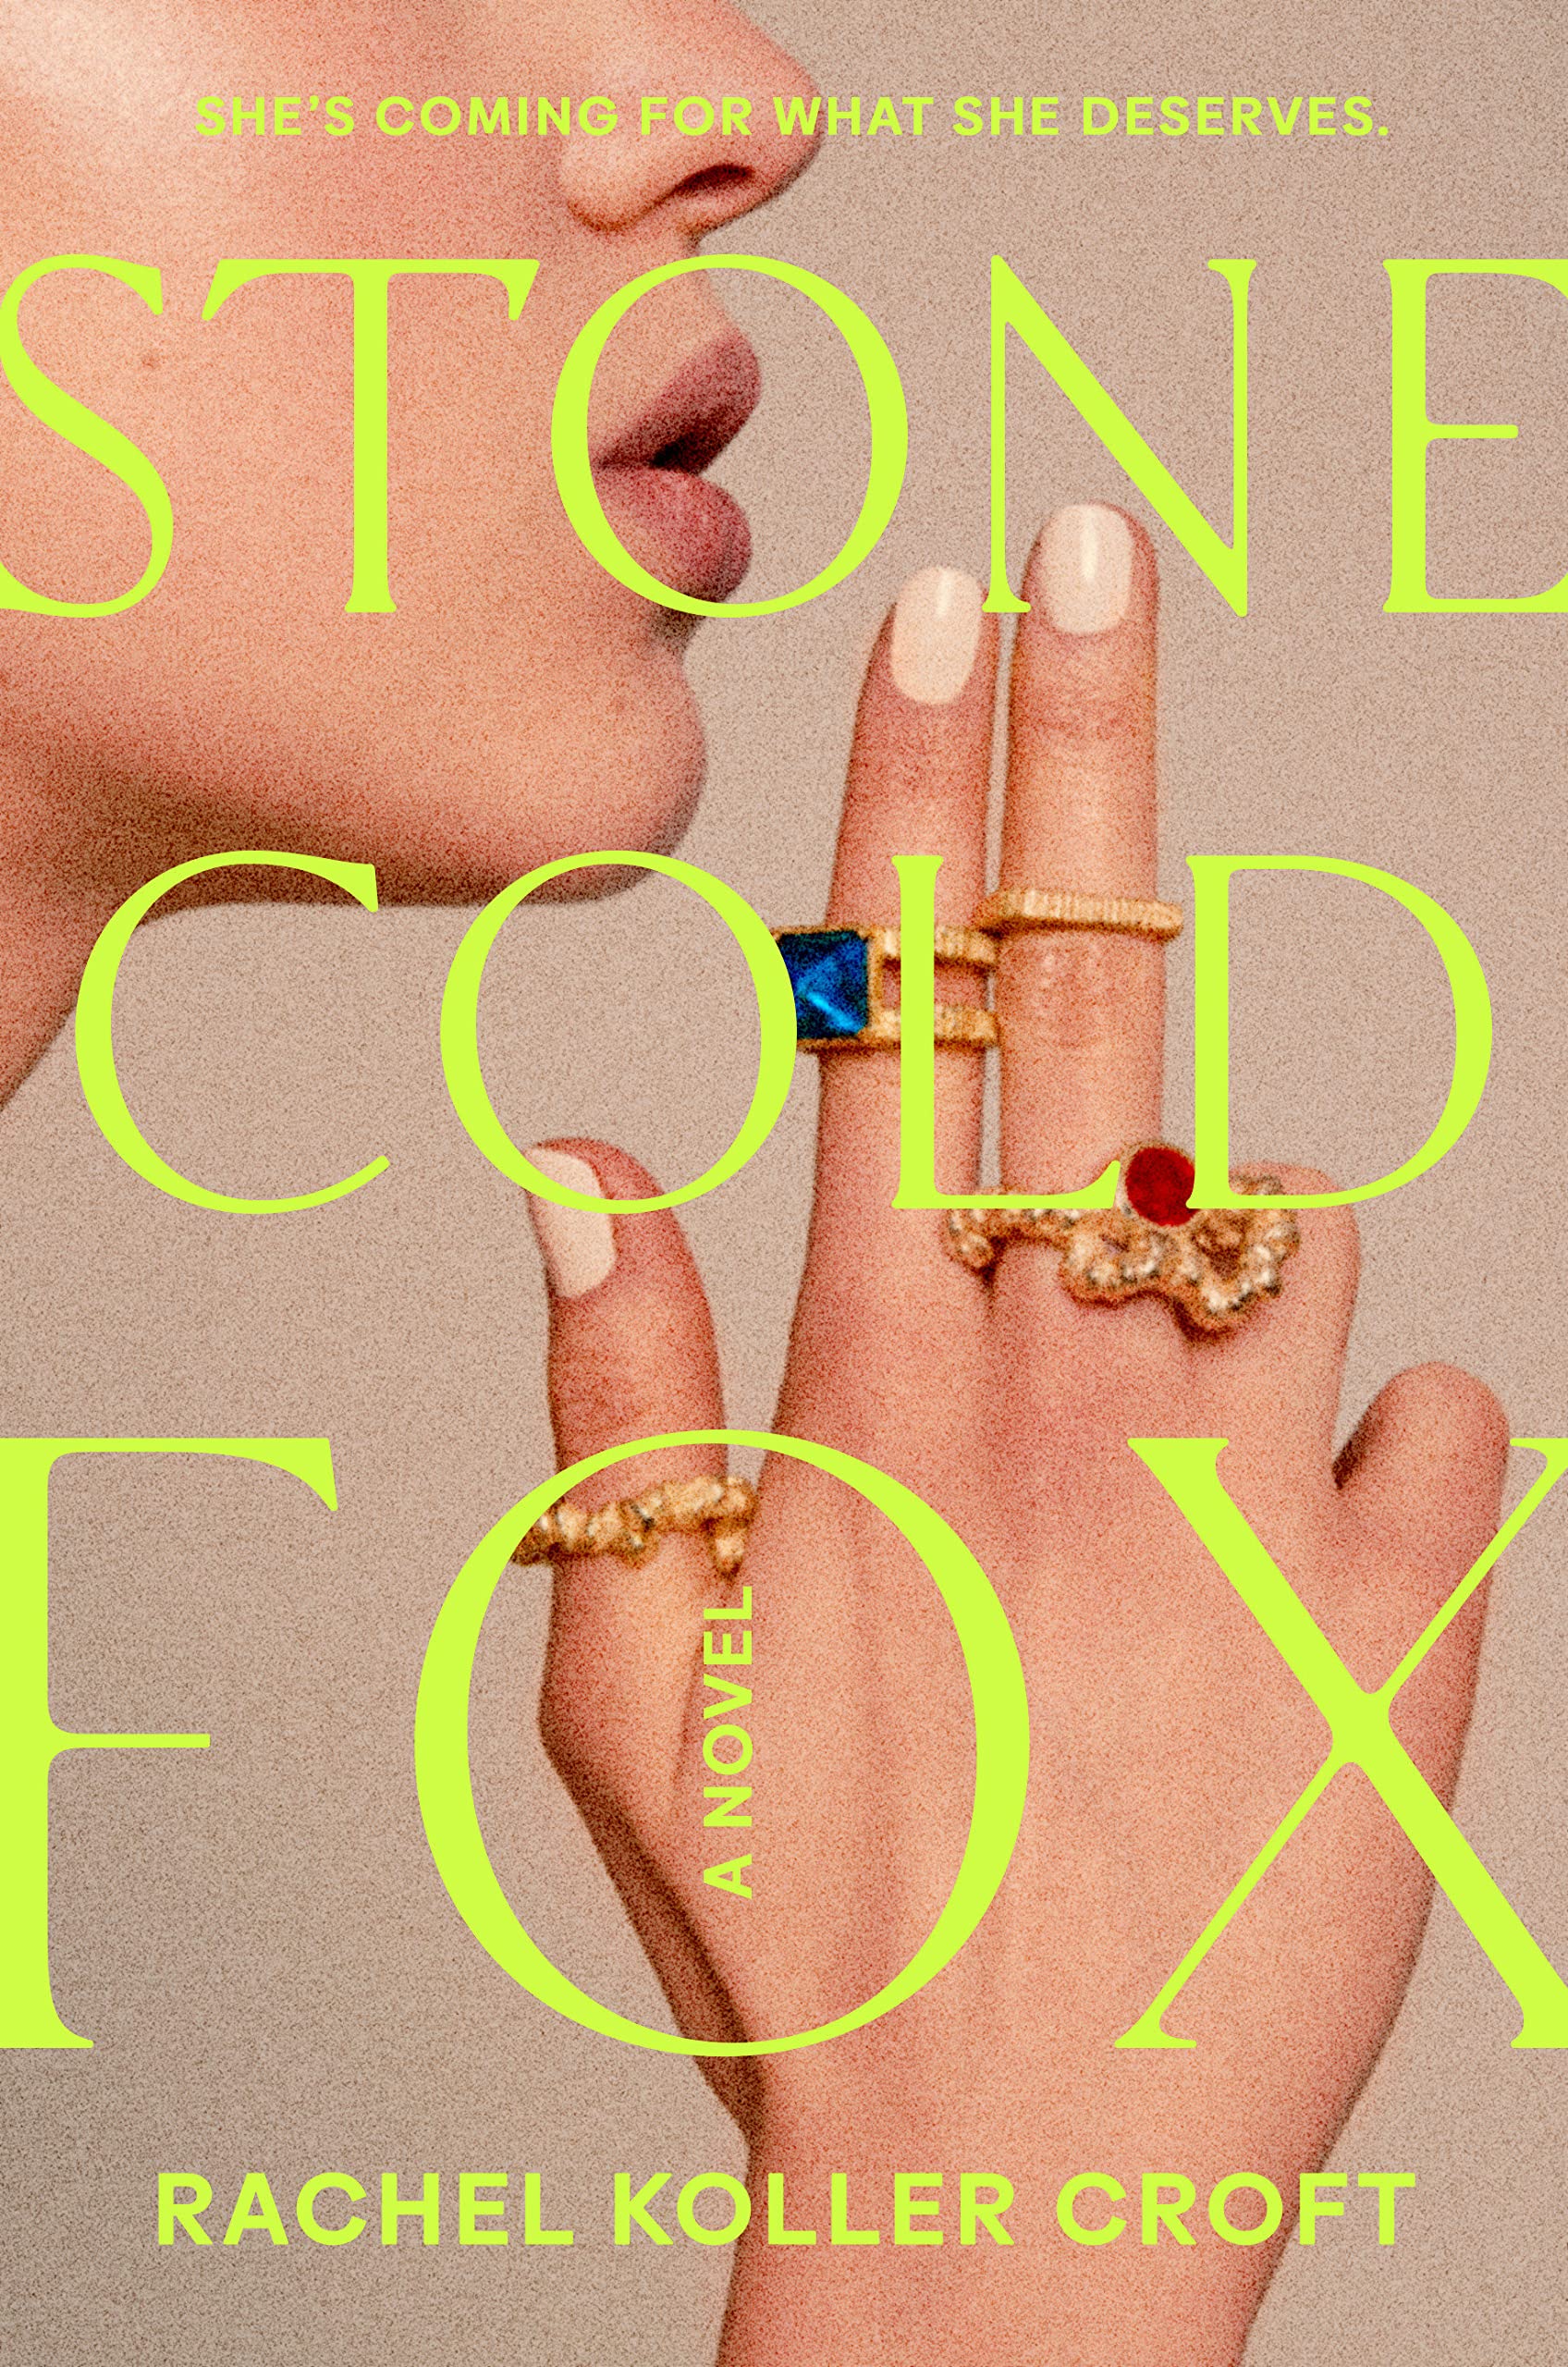 Image for "Stone Cold Fox"